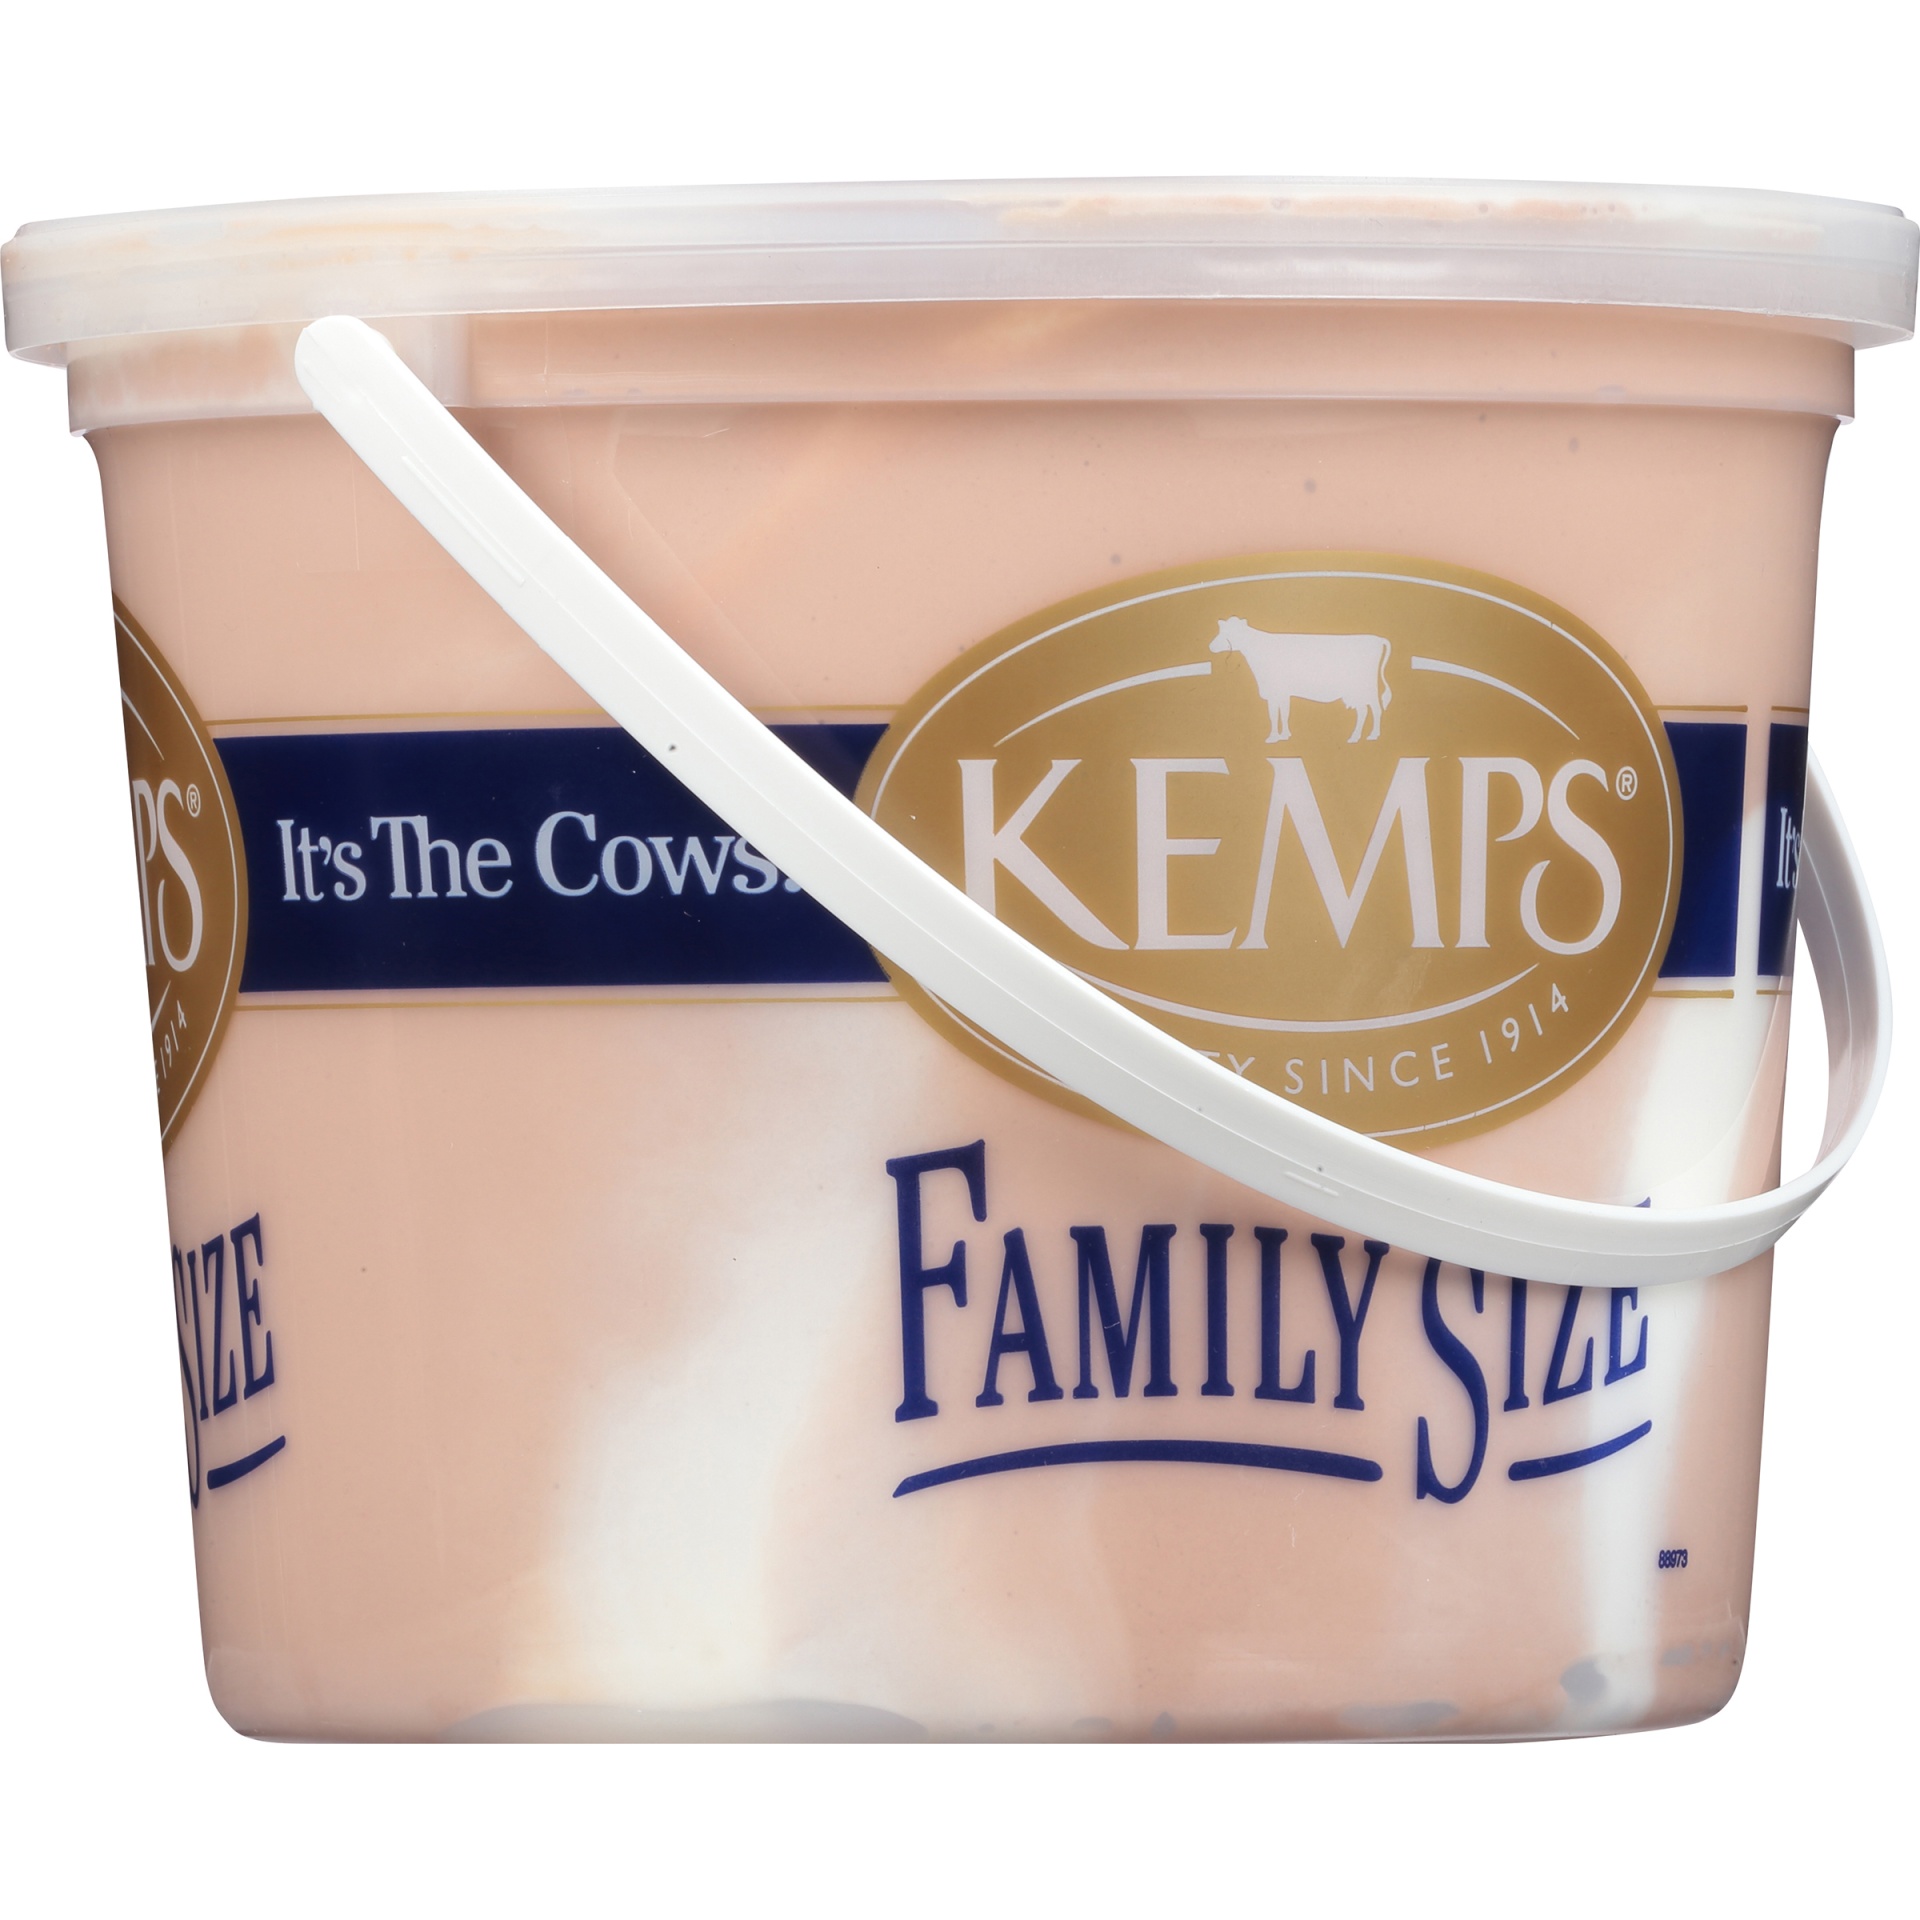 slide 3 of 6, Kemps Chocolate Marshmallow Reduced Fat Family Size Ice Cream, 1.03 gal